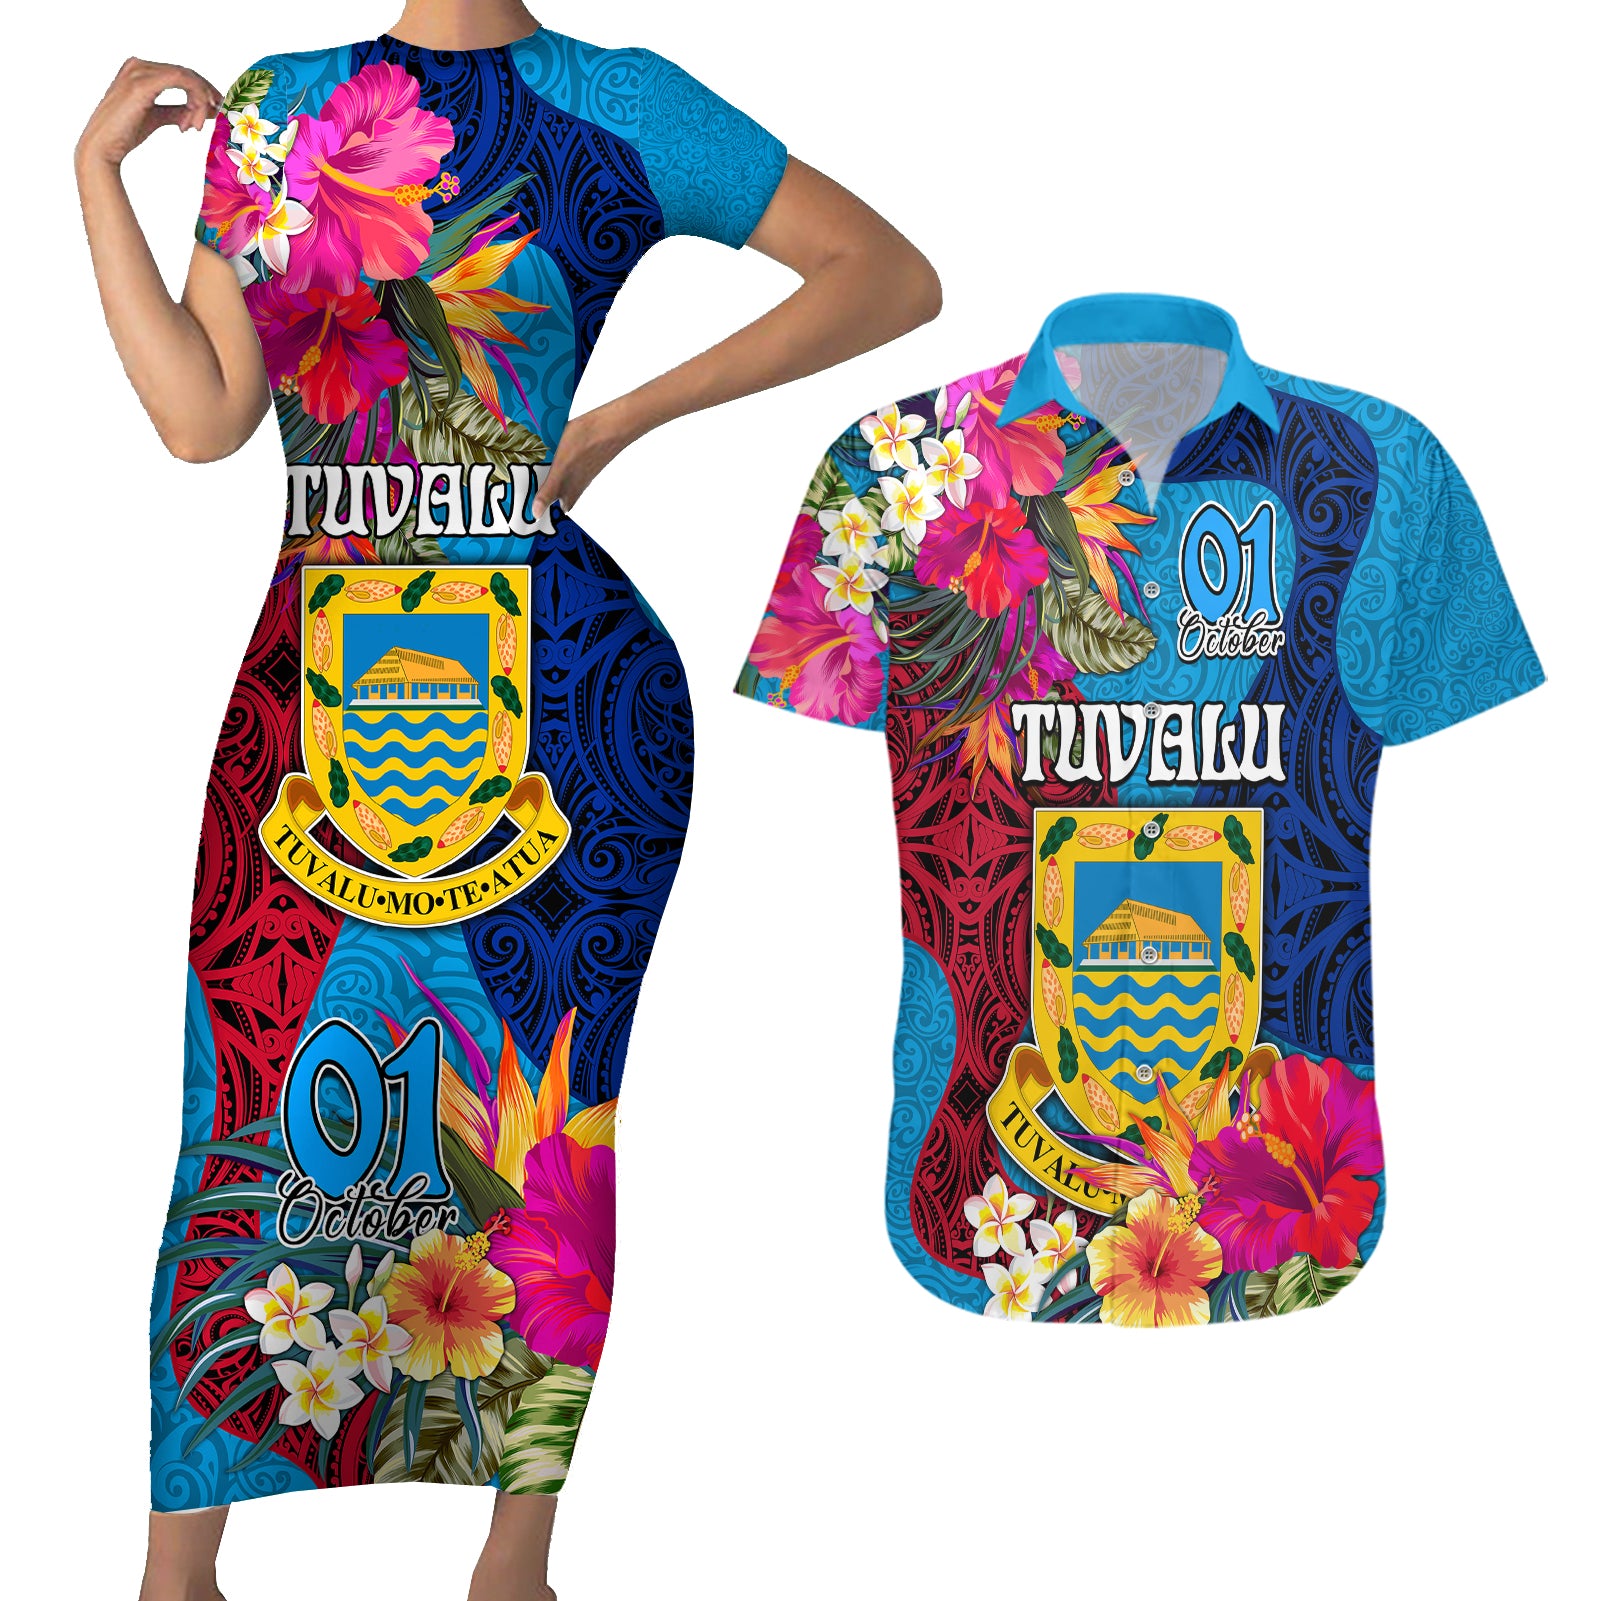 personalised-tuvalu-independence-day-couples-matching-short-sleeve-bodycon-dress-and-hawaiian-shirt-1st-october-45th-anniversary-polynesian-with-jungle-flower